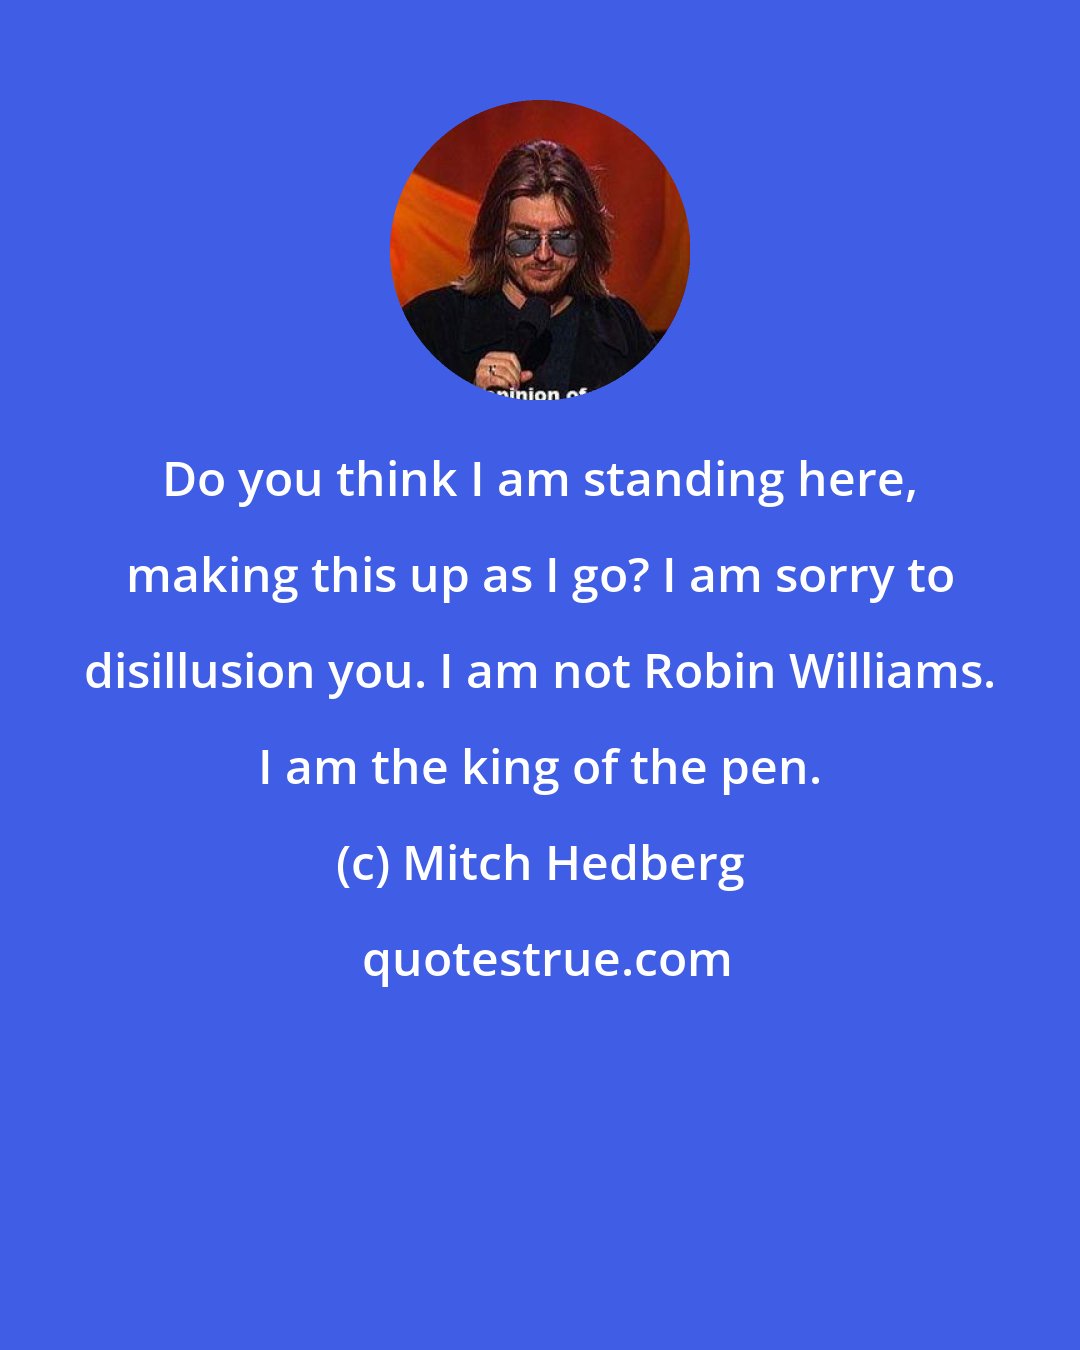 Mitch Hedberg: Do you think I am standing here, making this up as I go? I am sorry to disillusion you. I am not Robin Williams. I am the king of the pen.